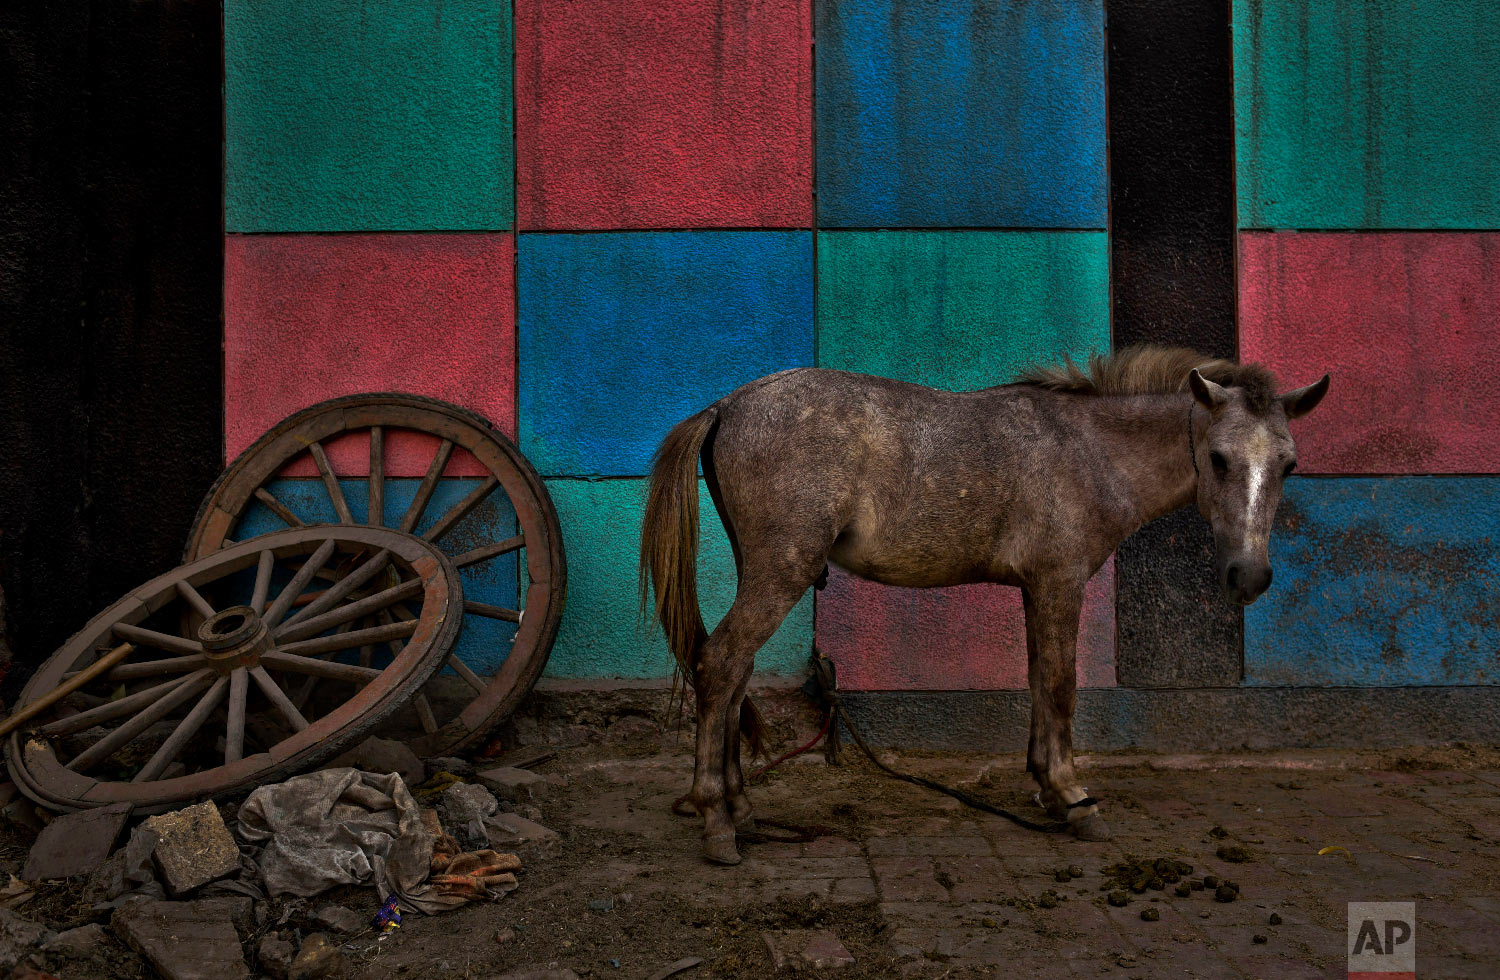  A mule stands next to color patterns painted on a school wall in New Delhi, India Sunday, Oct. 28, 2018. The animal is used for transporting construction material and other goods. (AP Photo/R S Iyer) 